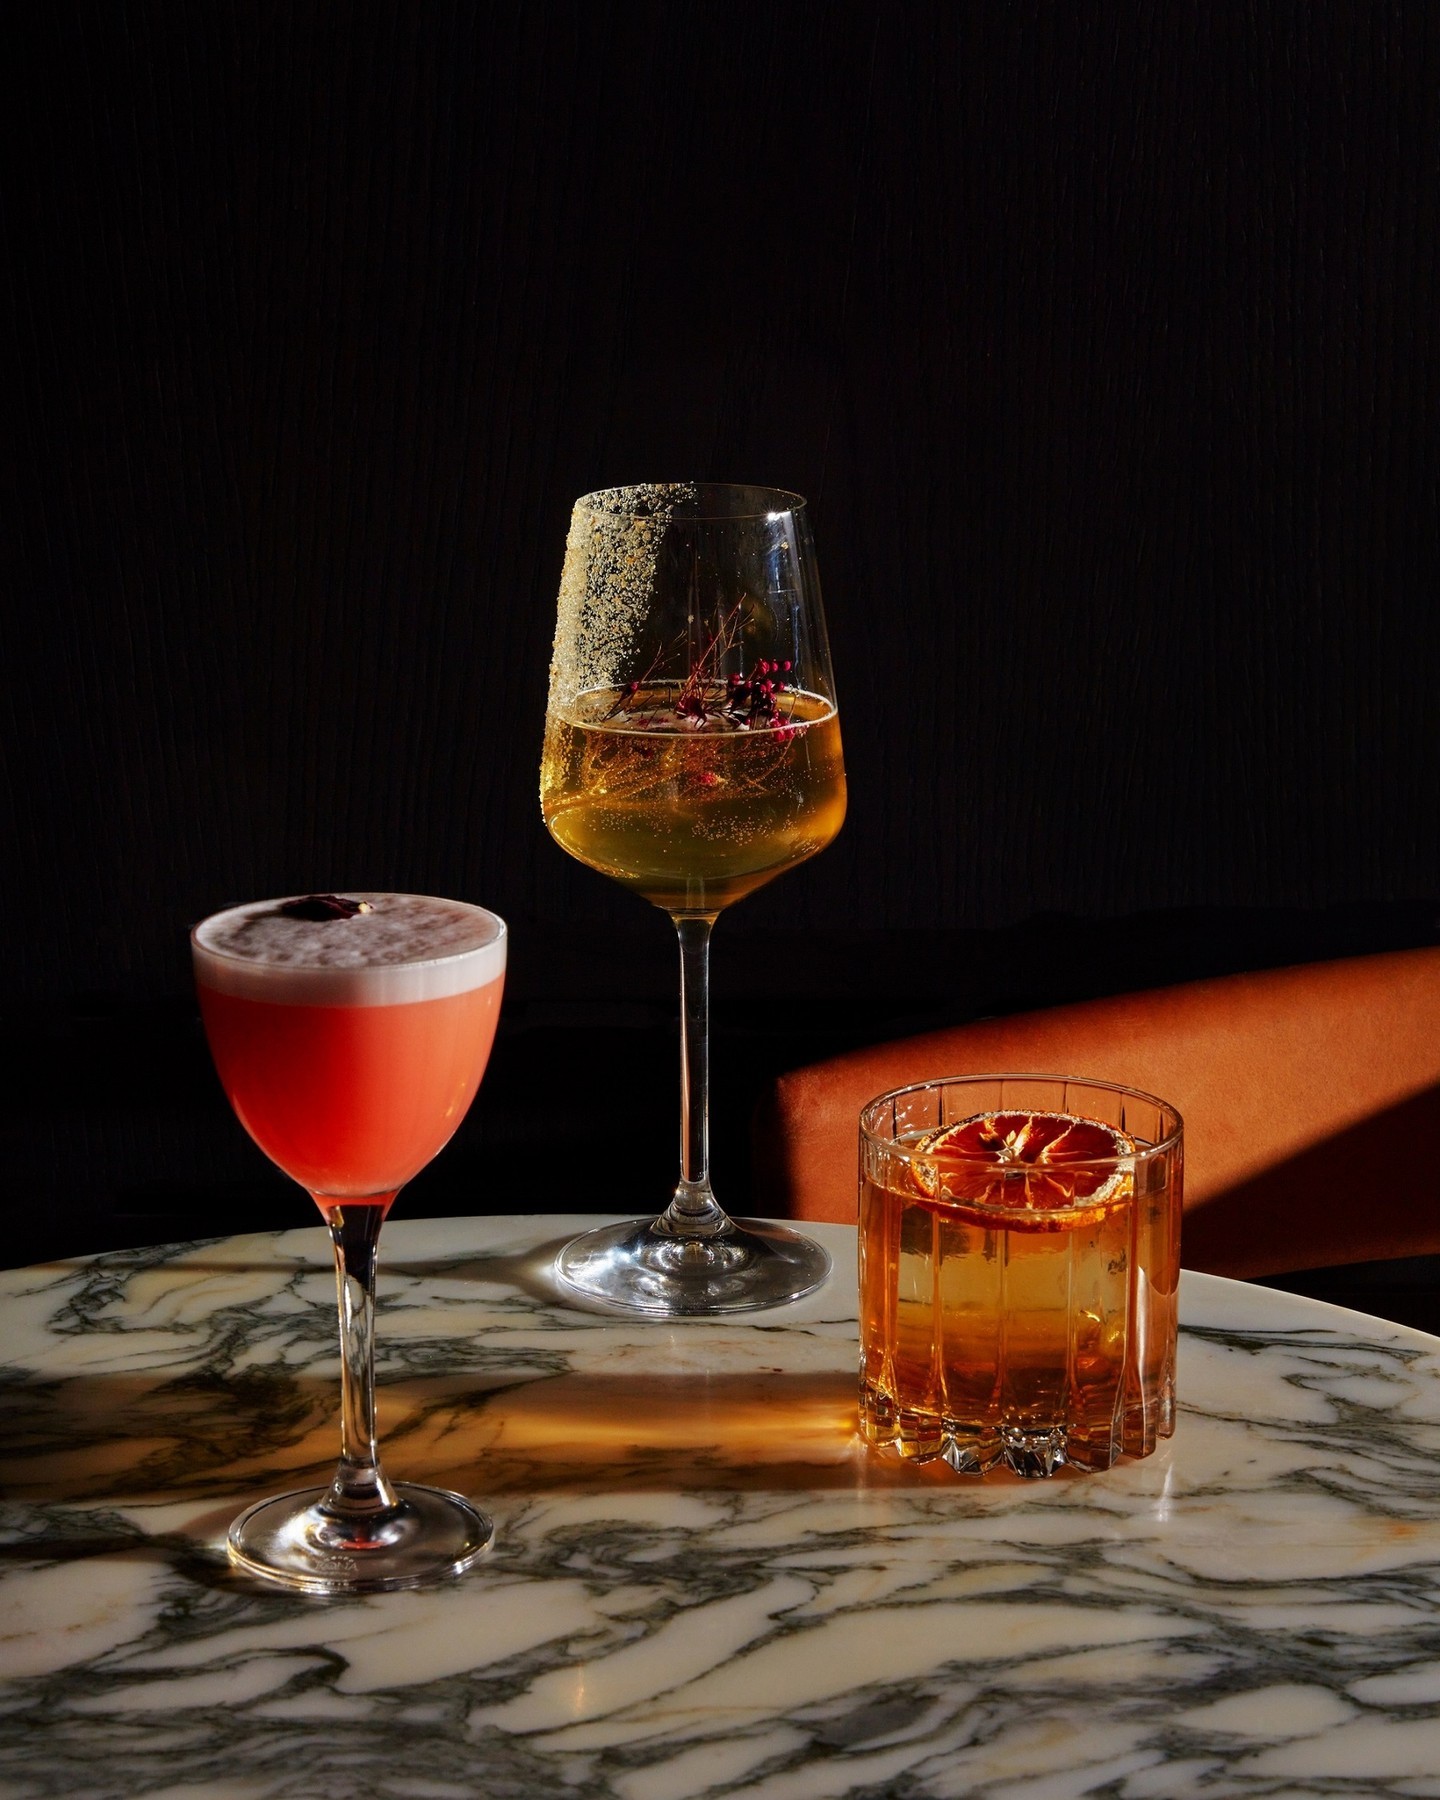 which Rose Lane libation will it be, my dear? check out our list of cocktails at the link in bio and plan your night cap accordingly